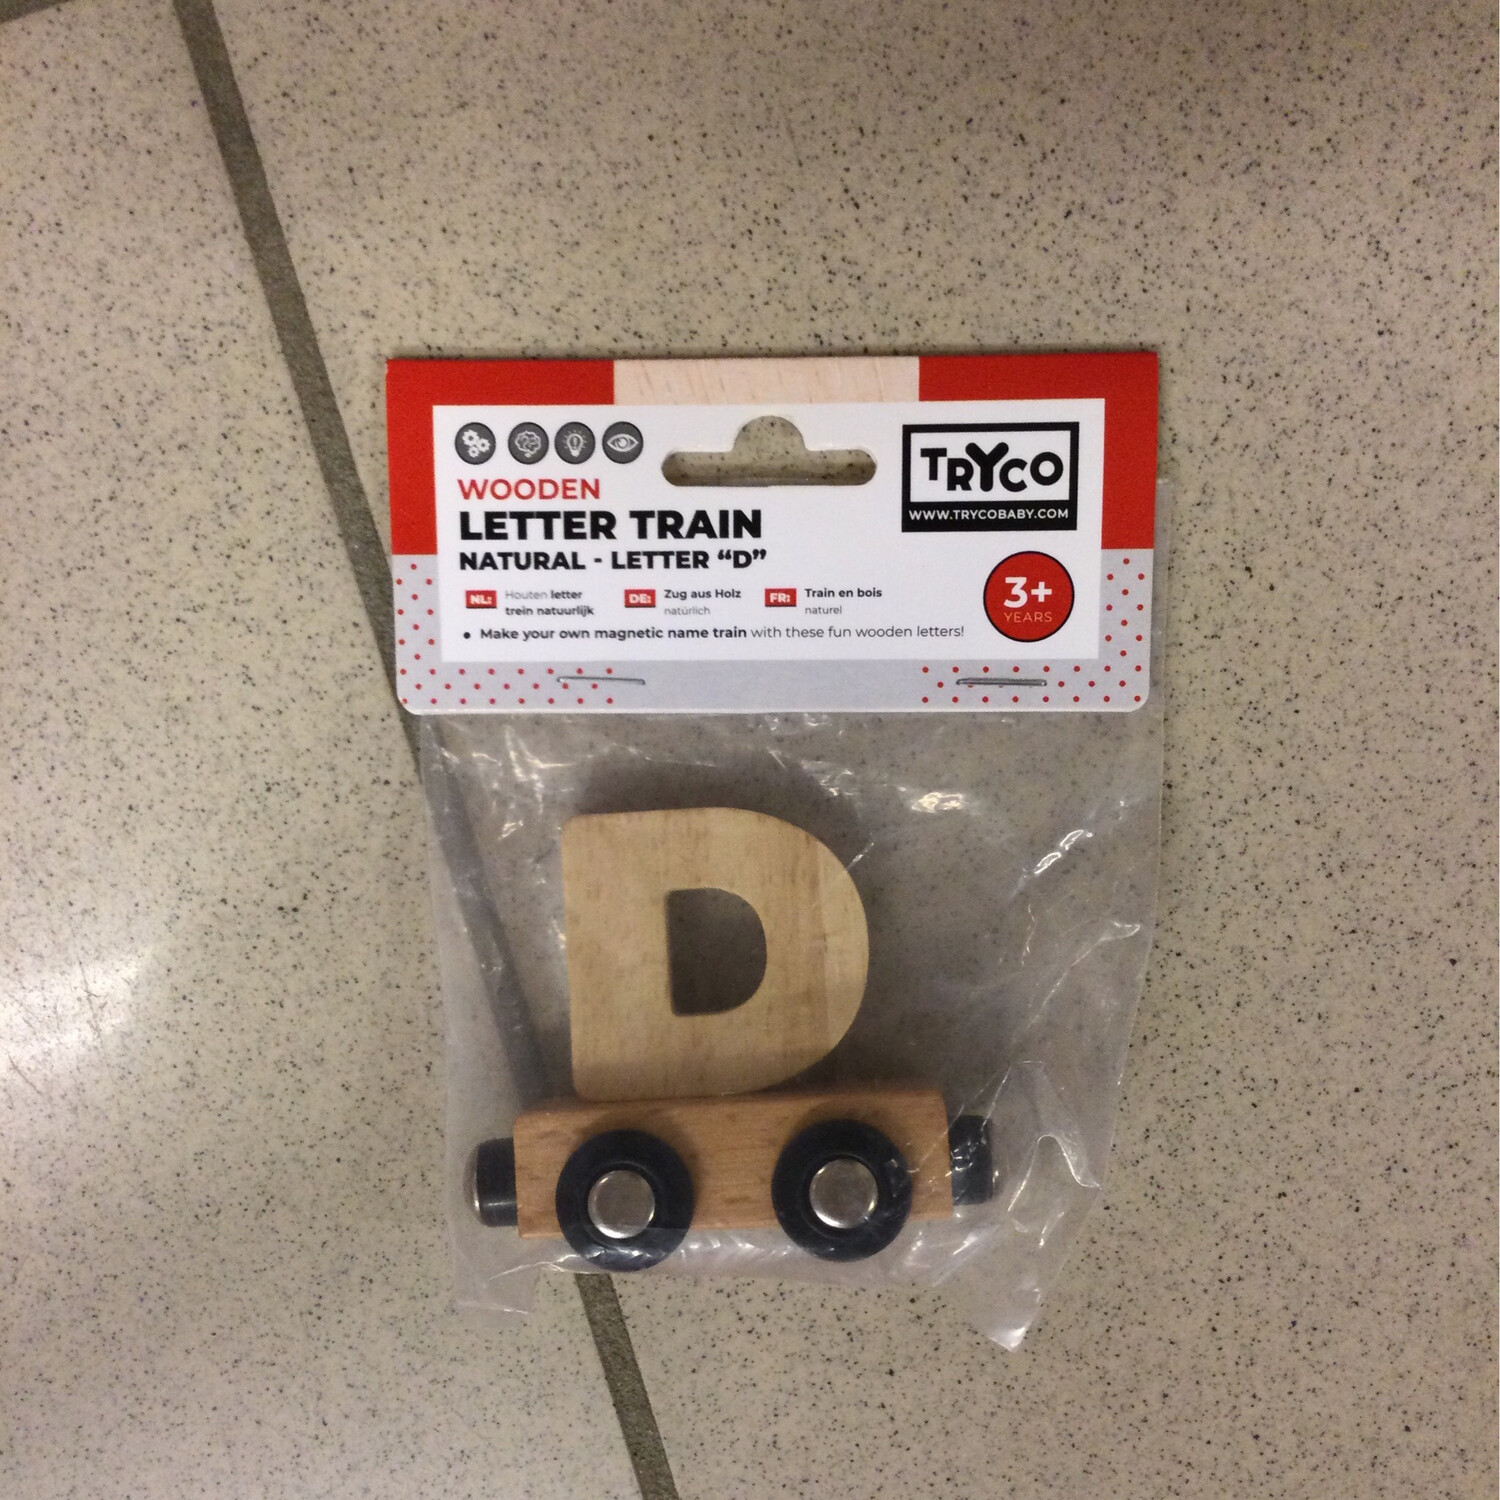 Tryco Wooden Letter Train D